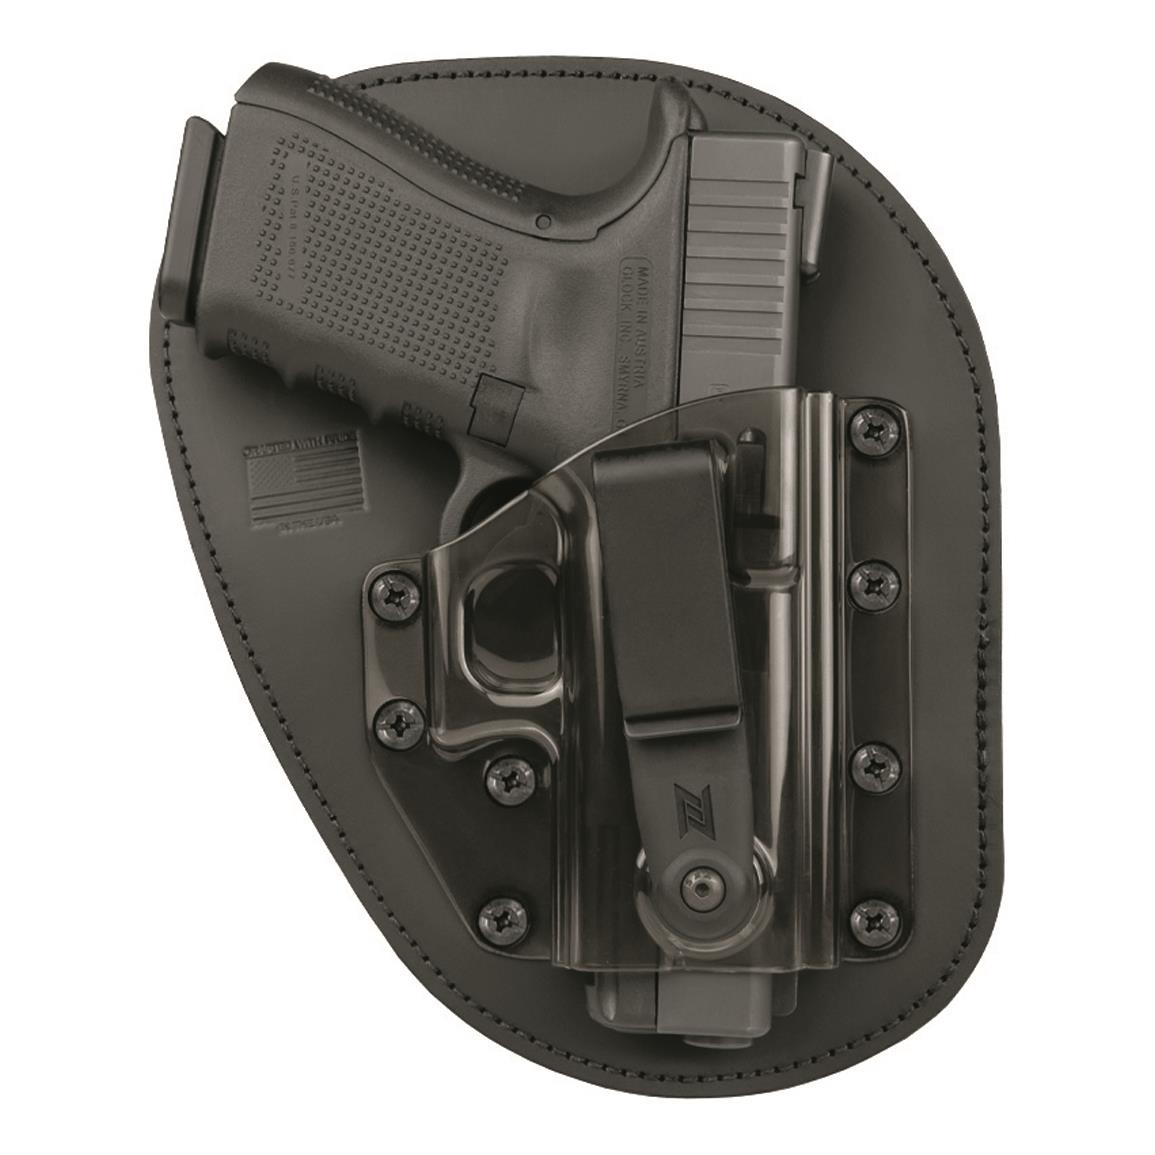 N8 Tactical The Professional IWB Holster